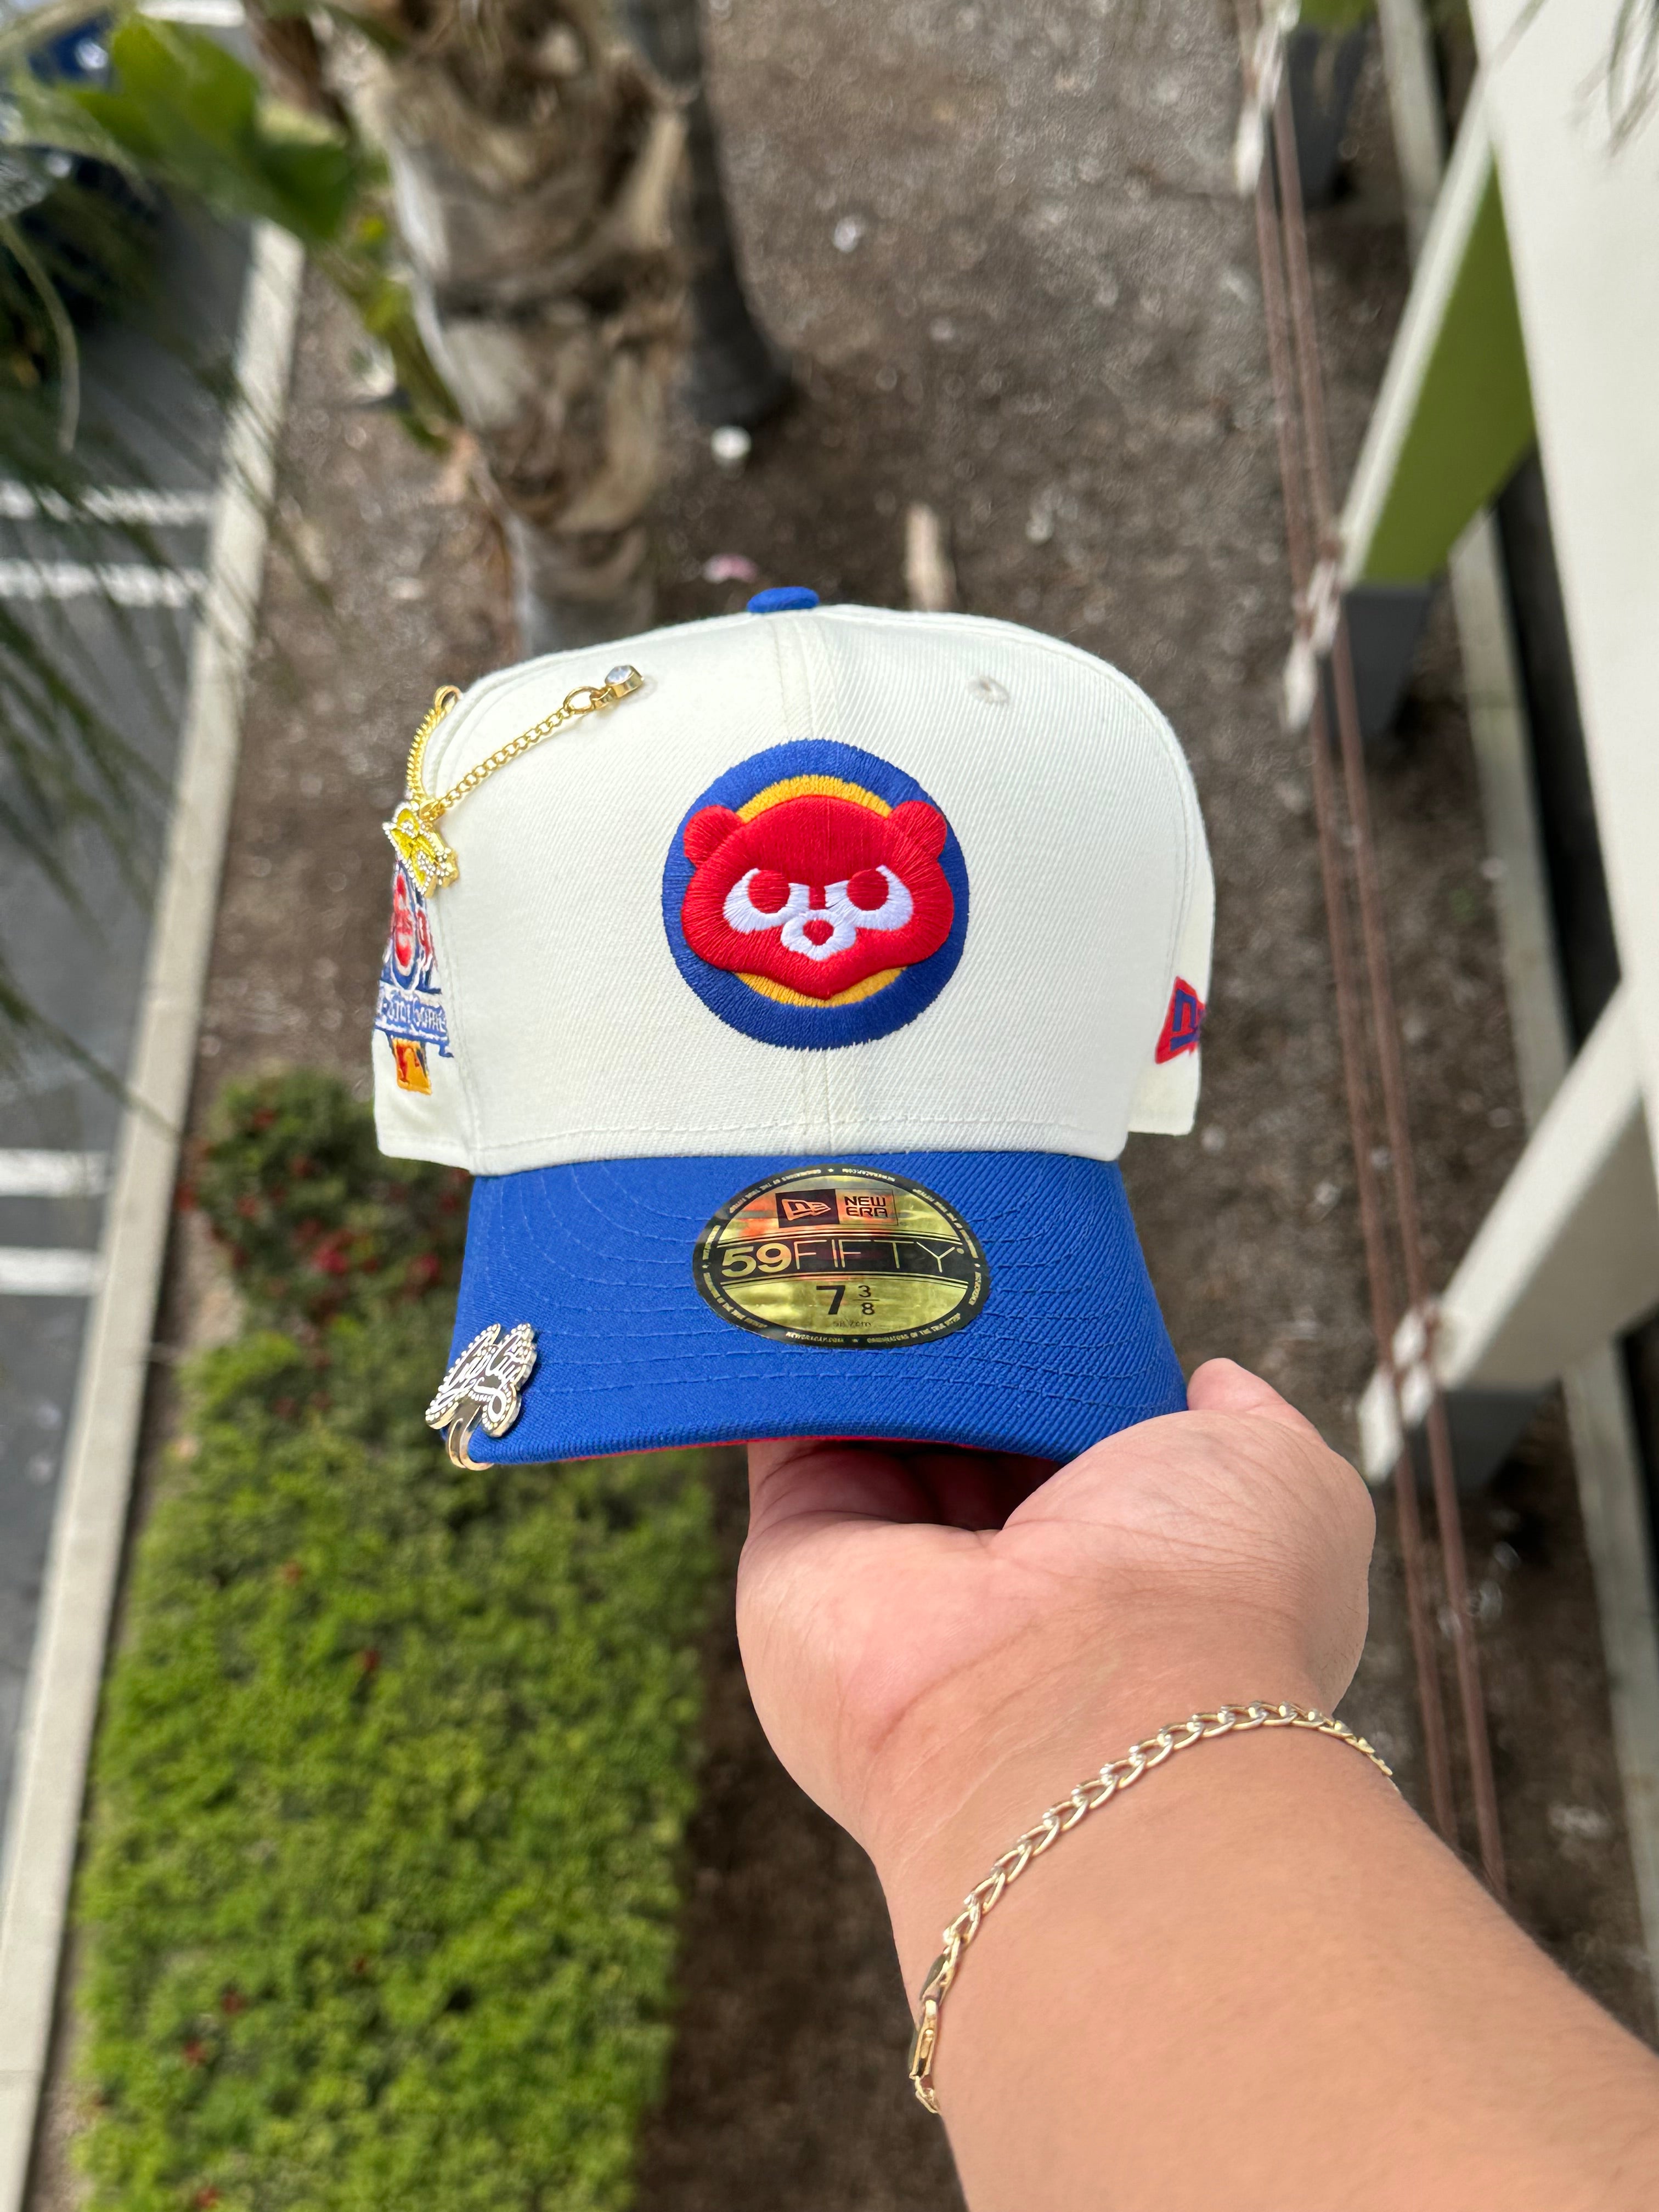 NEW ERA EXCLUSIVE 59FIFTY CHROME WHITE/BLUE CHICAGO CUBS W/ 1990 ALL STAR GAME PATCH